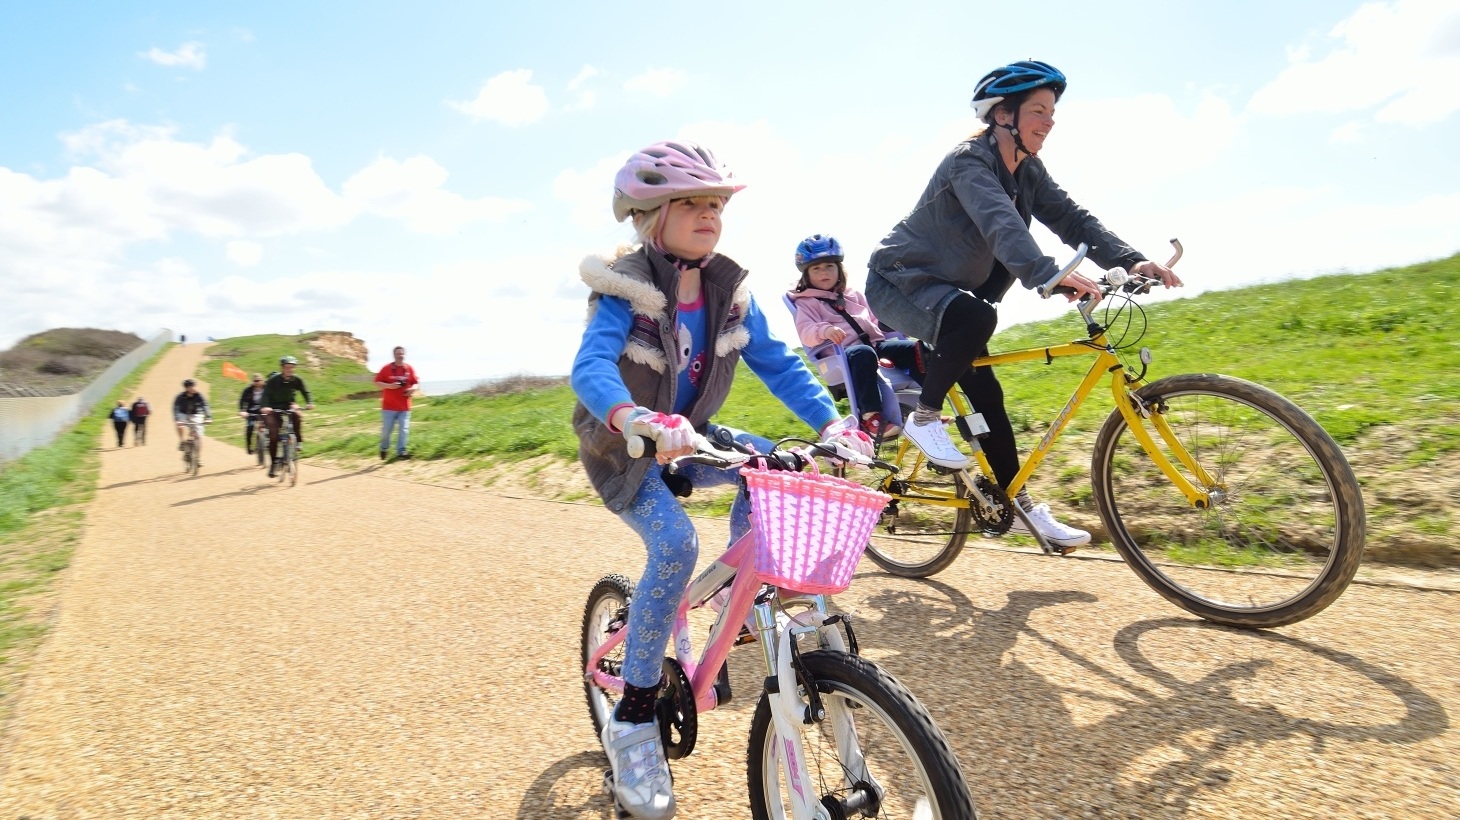 Where to cycle with kids - Sustrans.org.uk